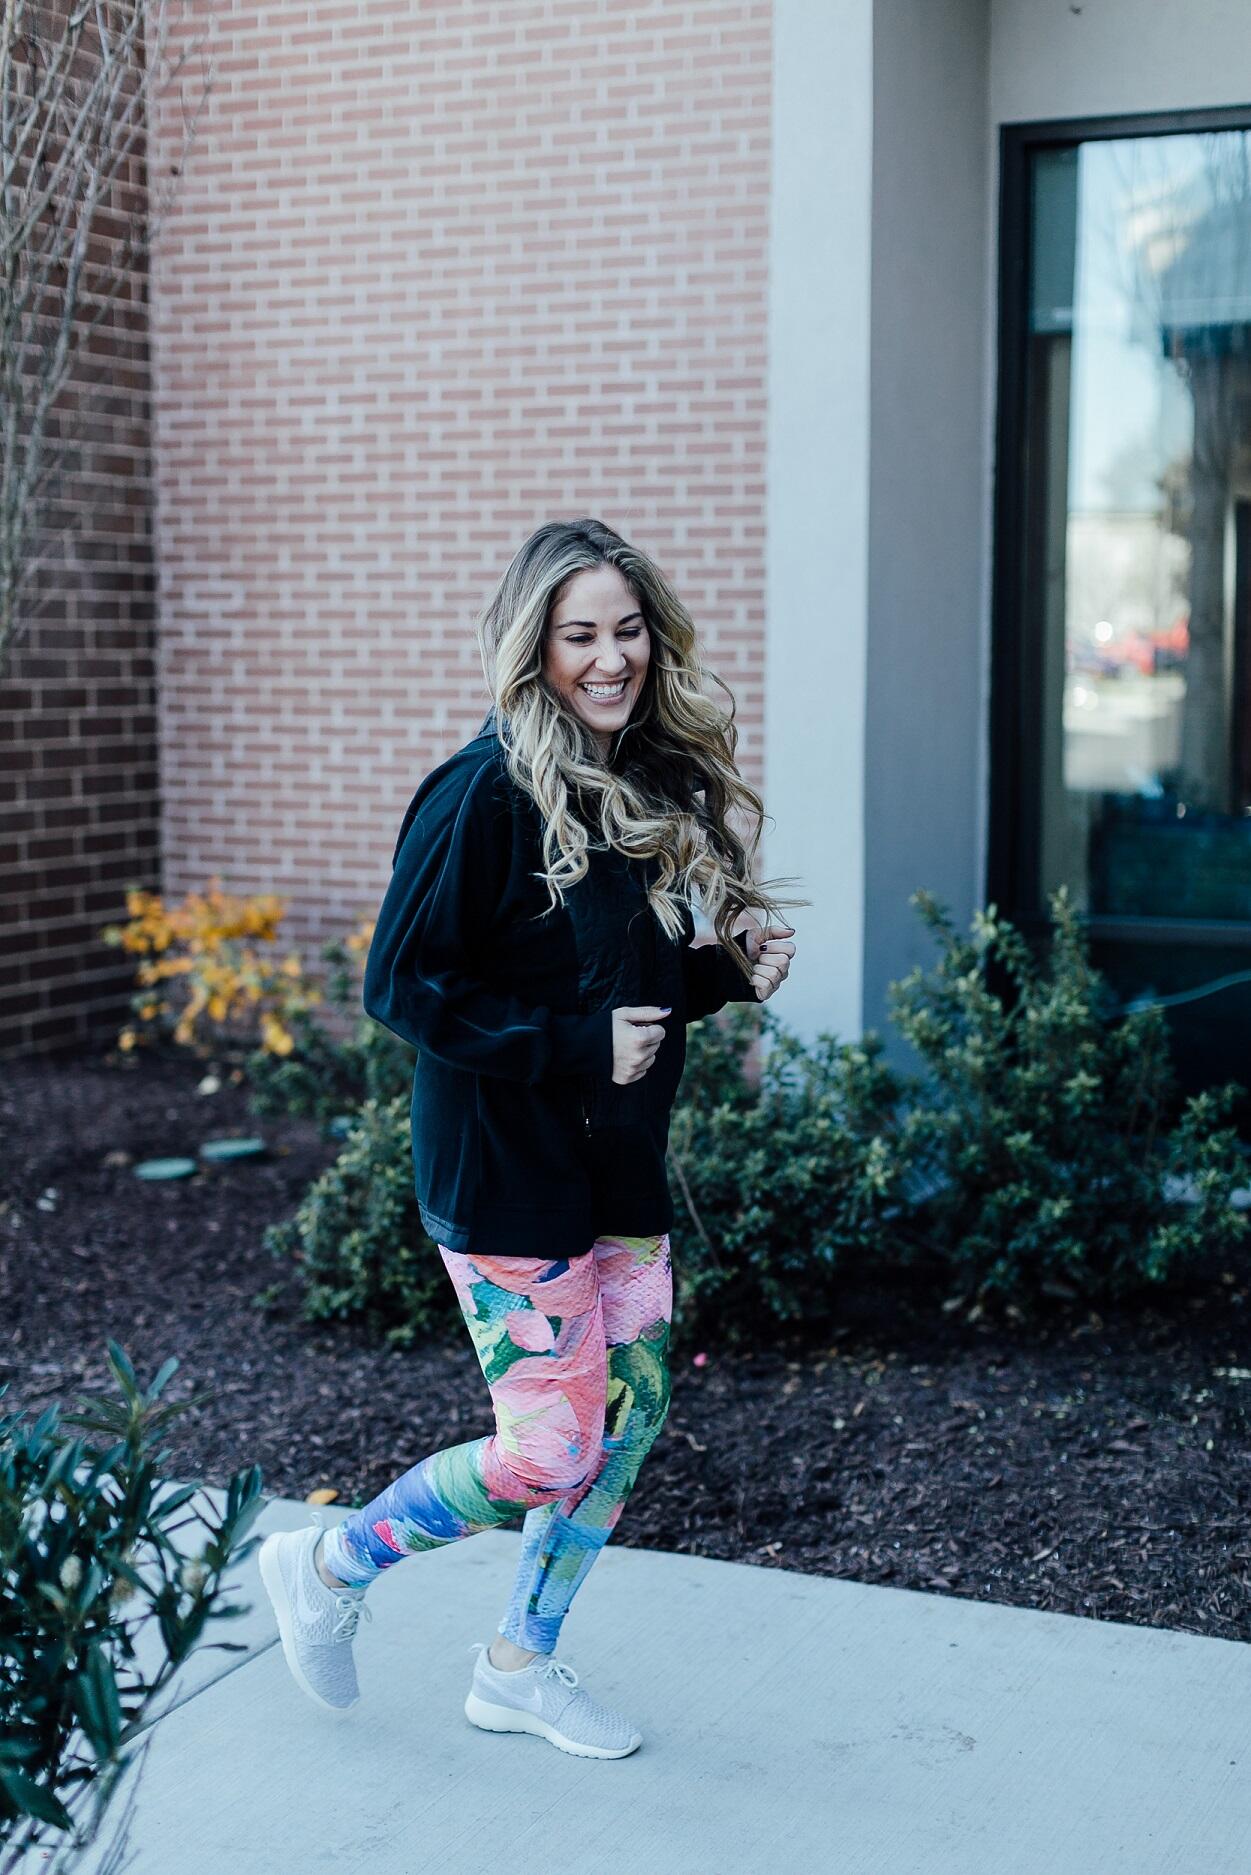 My Winter Workout Routine by East Memphis style blogger Walking in Memphis in High Heels